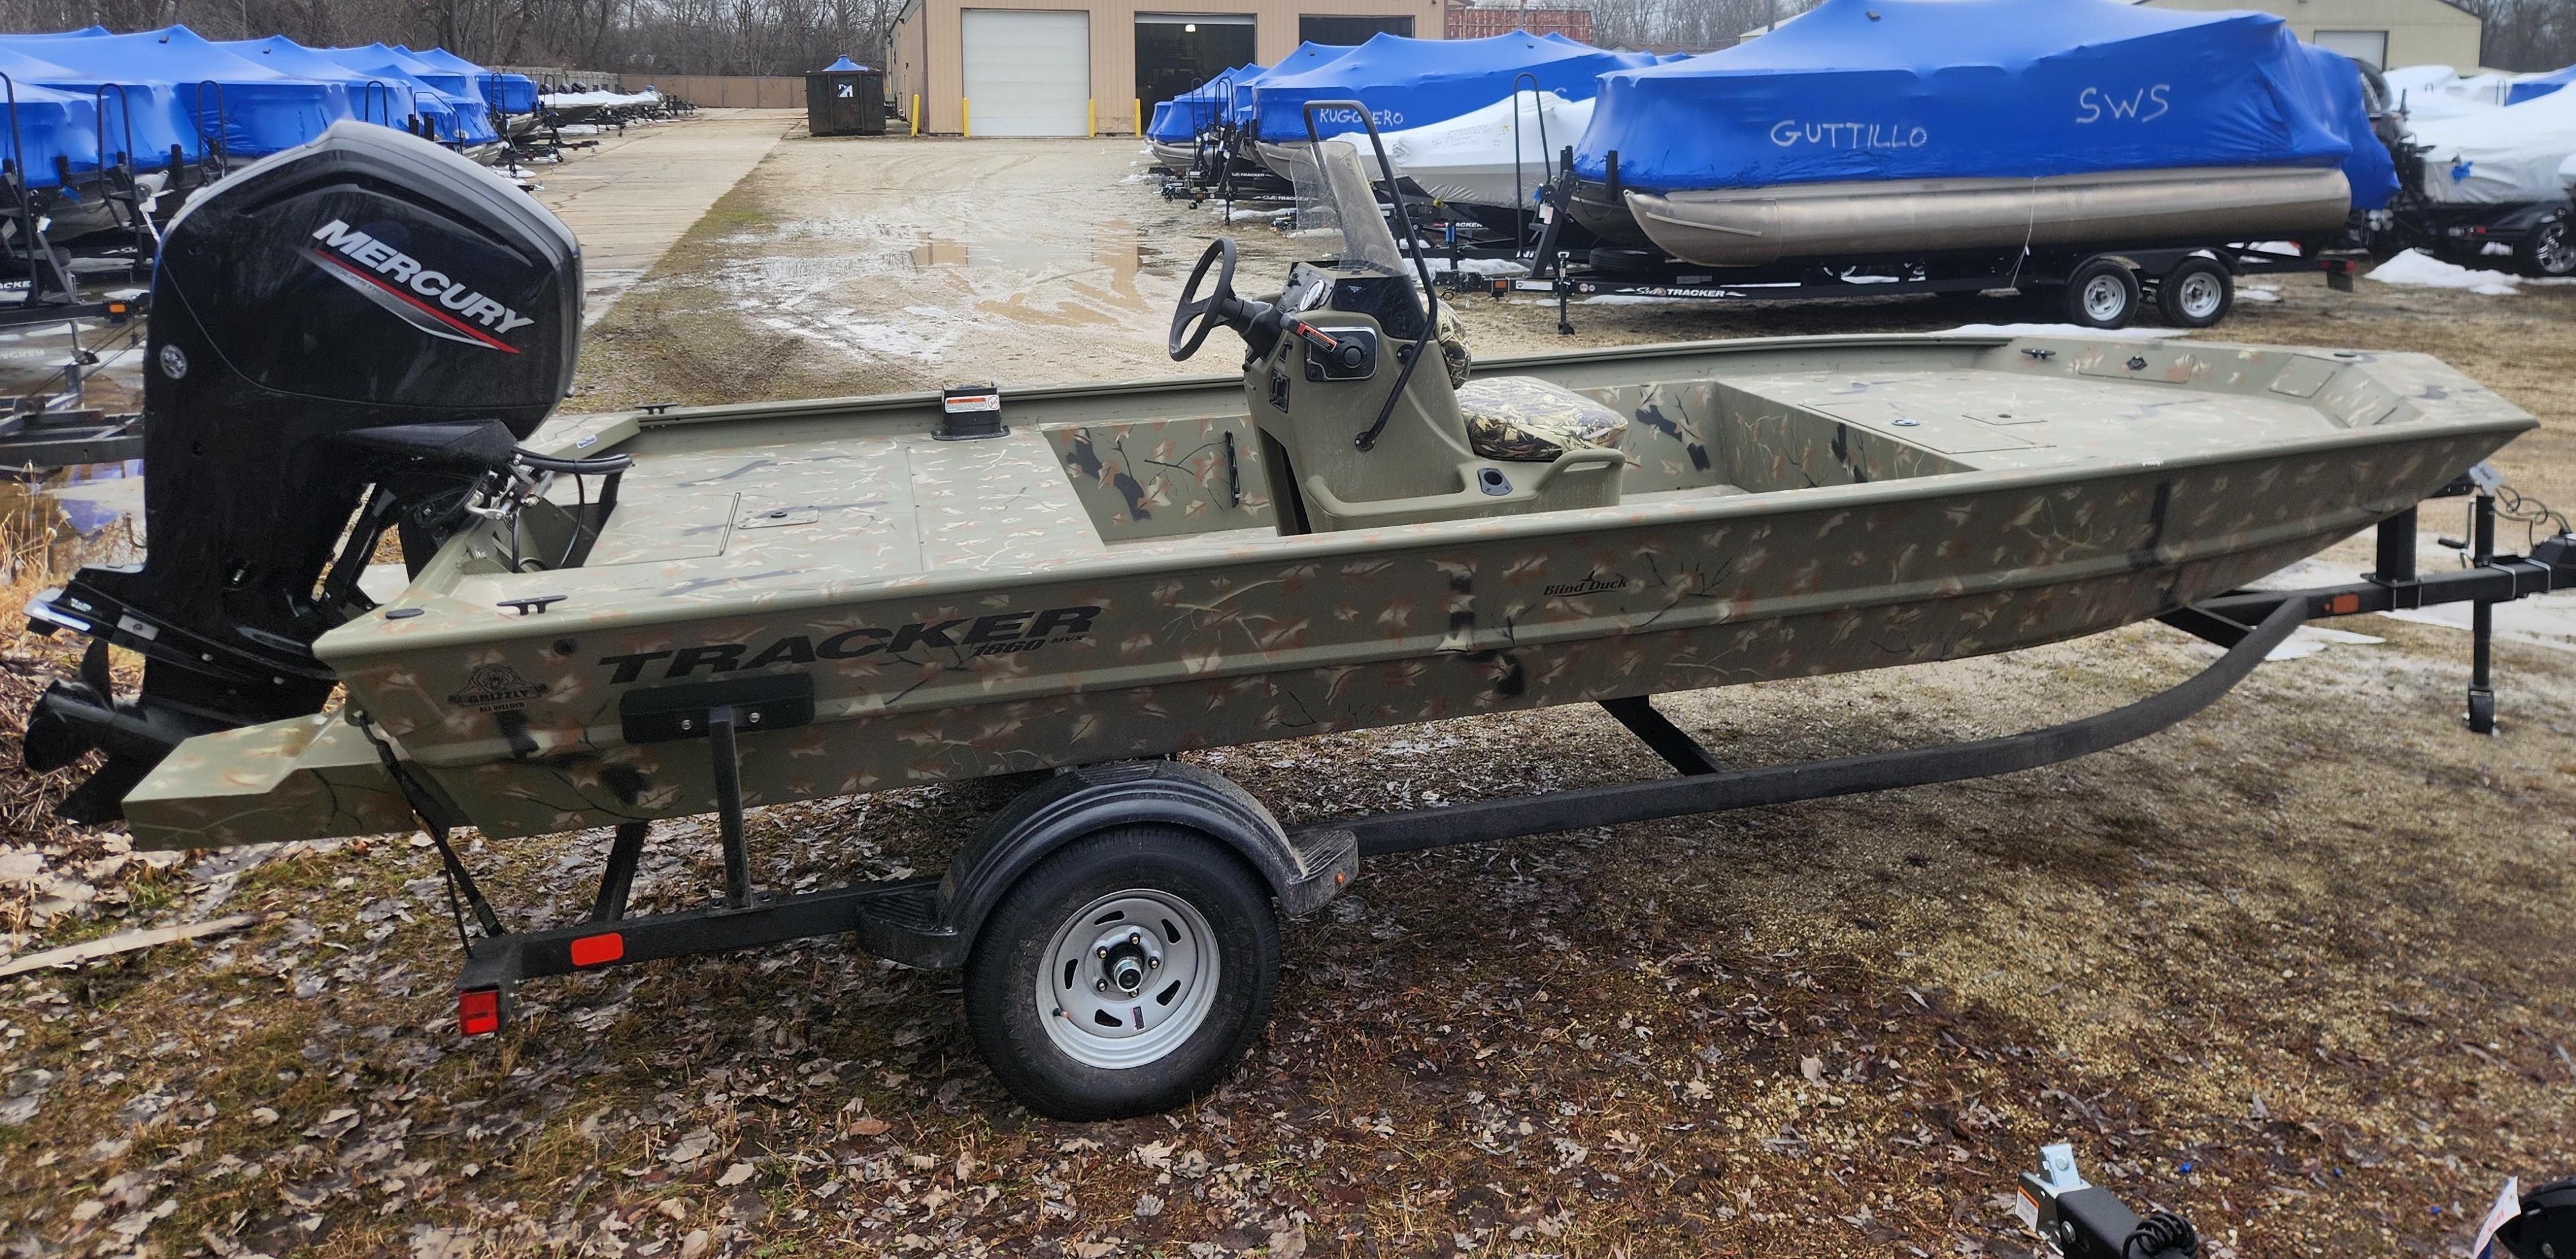 Explore Tracker Grizzly 2072 Cc Sportsman Kicker Boats For Sale - Boat  Trader